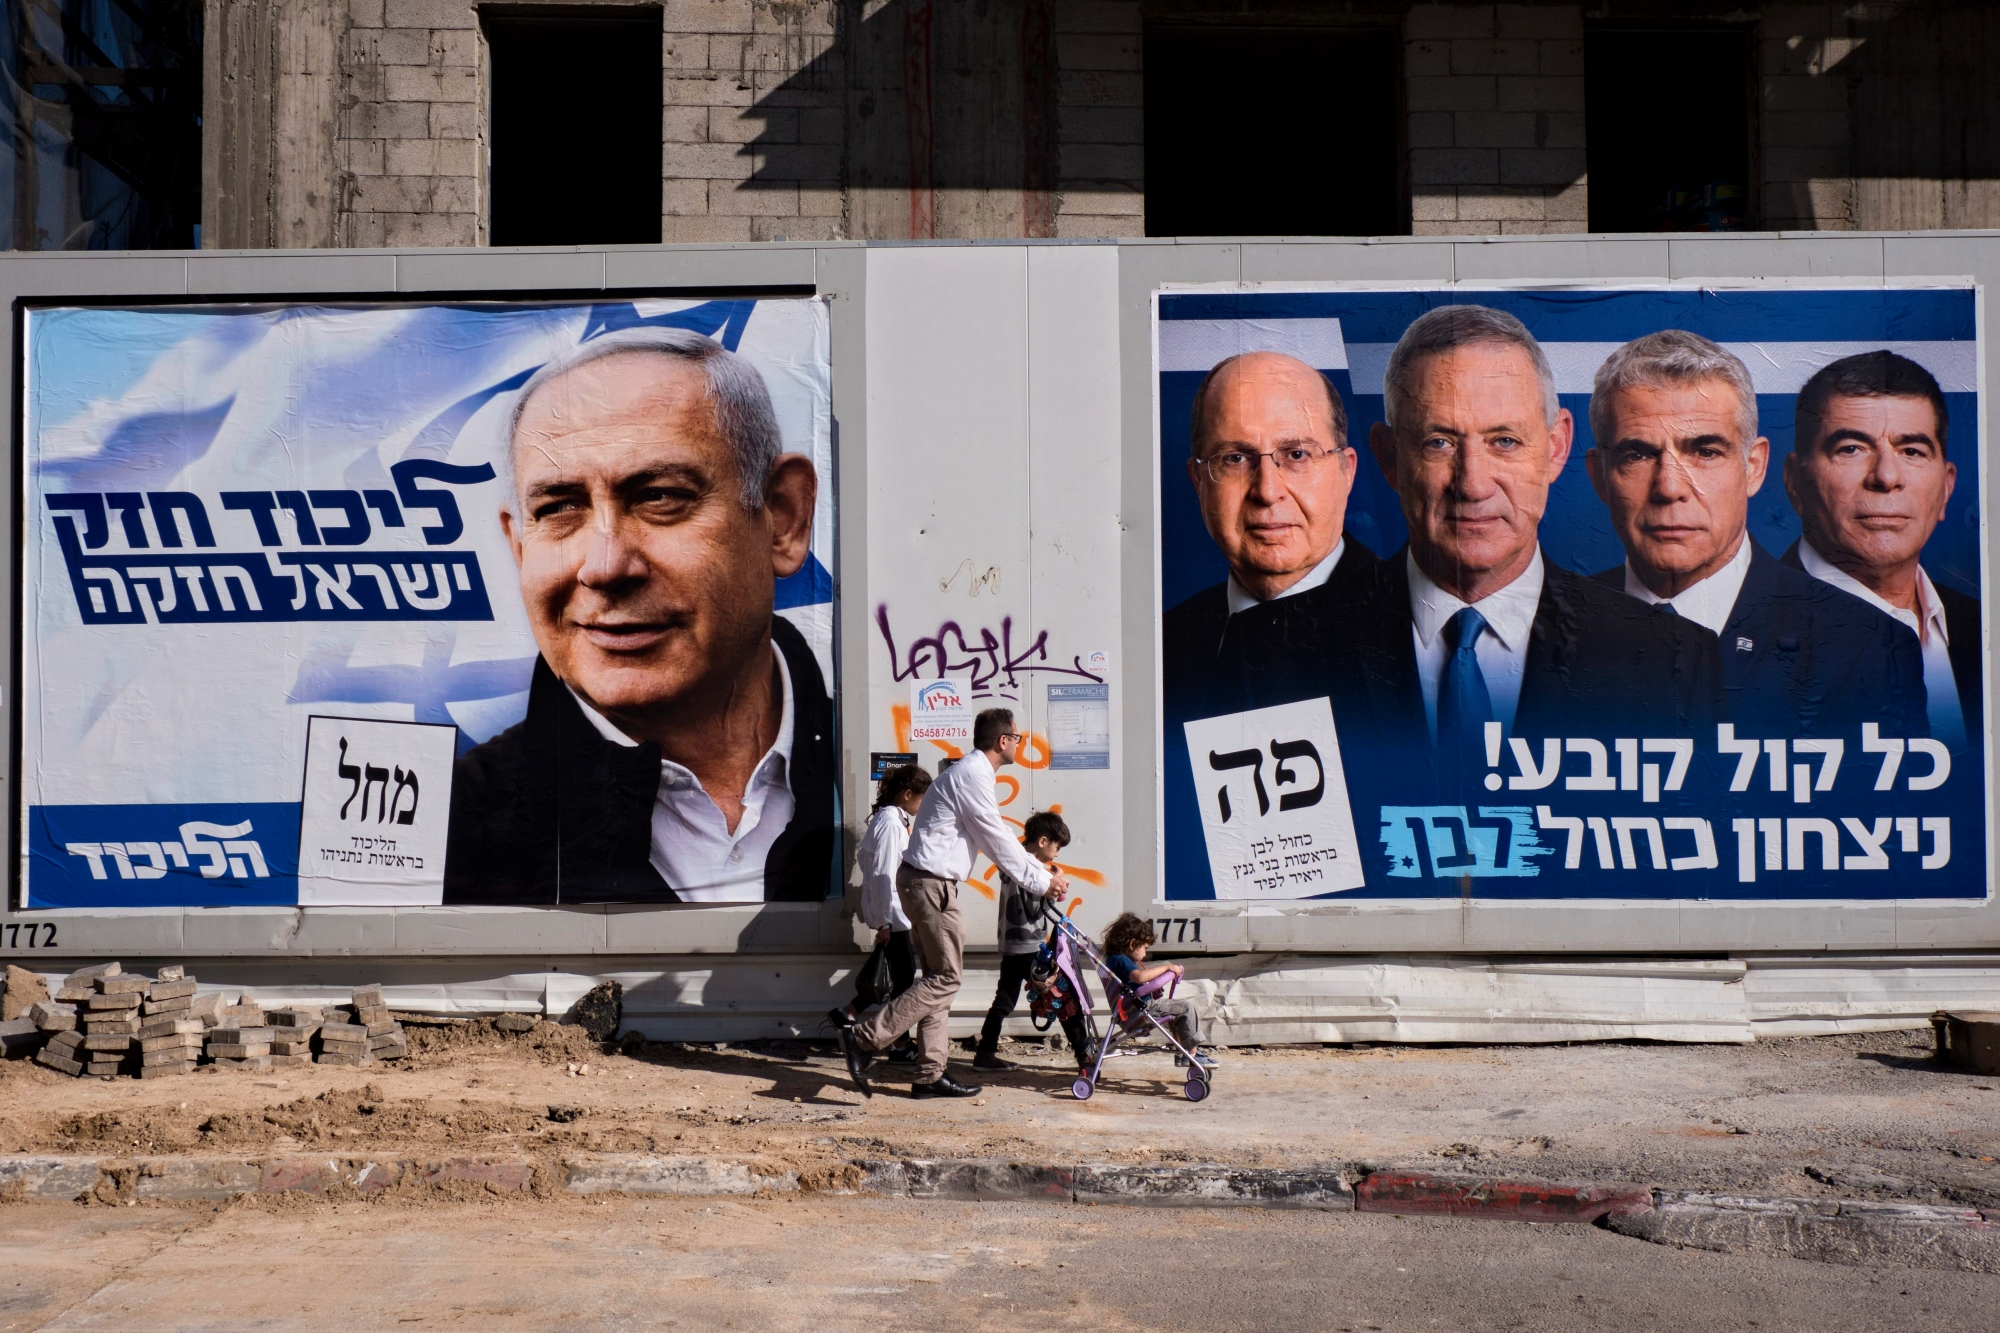 People walk by election campaign billboards showing Israeli Prime Minister and head of the Likud party Benjamin Netanyahu, left, alongside the Blue and White party leaders, from left to right, Moshe Yaalon, Benny Gantz, Yair Lapid and Gabi Ashkenazi, in Tel Aviv, Israel, Wednesday, April 3, 2019. Hebrew on billboards reads, left "Strong Likud strong Israel" on the right "Every vote matters, win Blue and White". (AP Photo/Oded Balilty) Israel Election